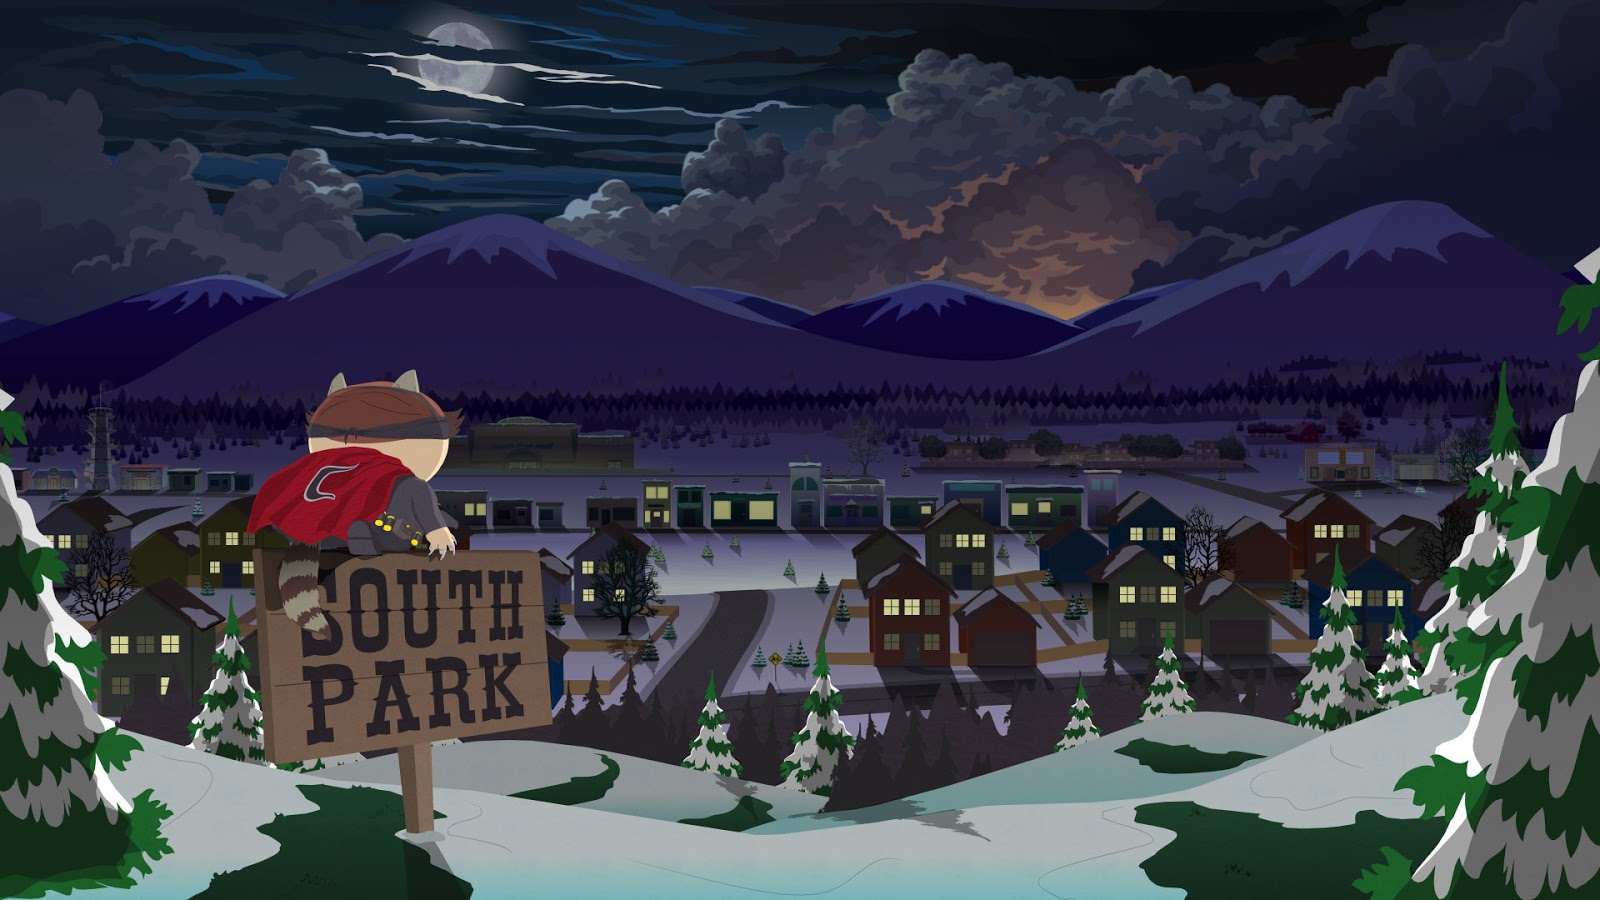 Mysterion, Toolshed, Human Kite, Mosquito, Mint Berry - South Park Night Time , HD Wallpaper & Backgrounds